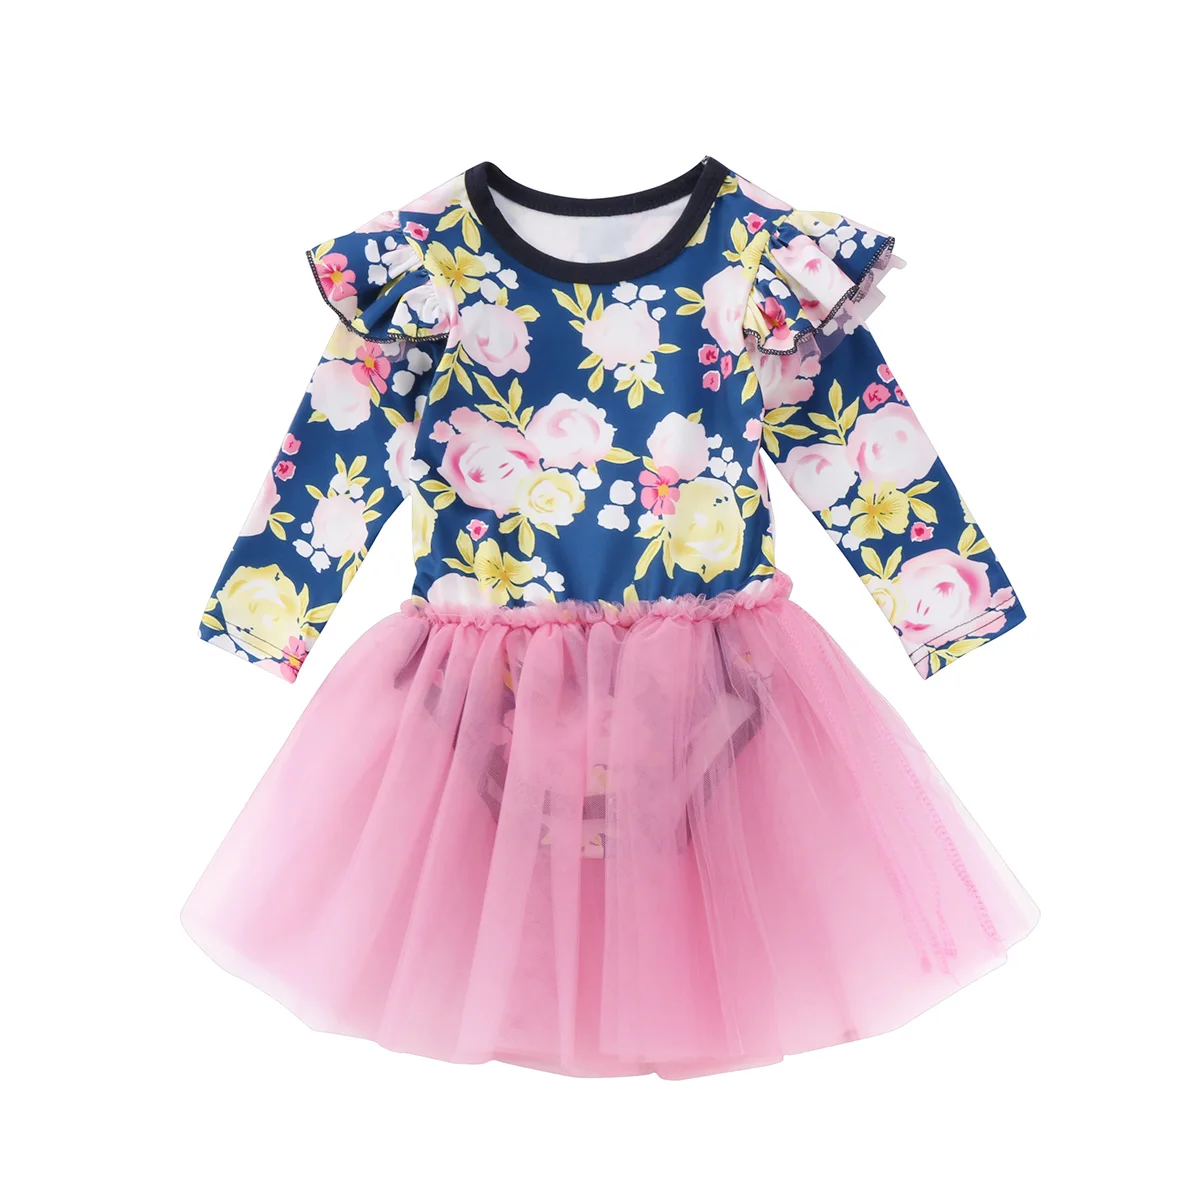 Fashion Kids Baby Girls Floral Long Sleeve Romper Dress Outfits Lace ...